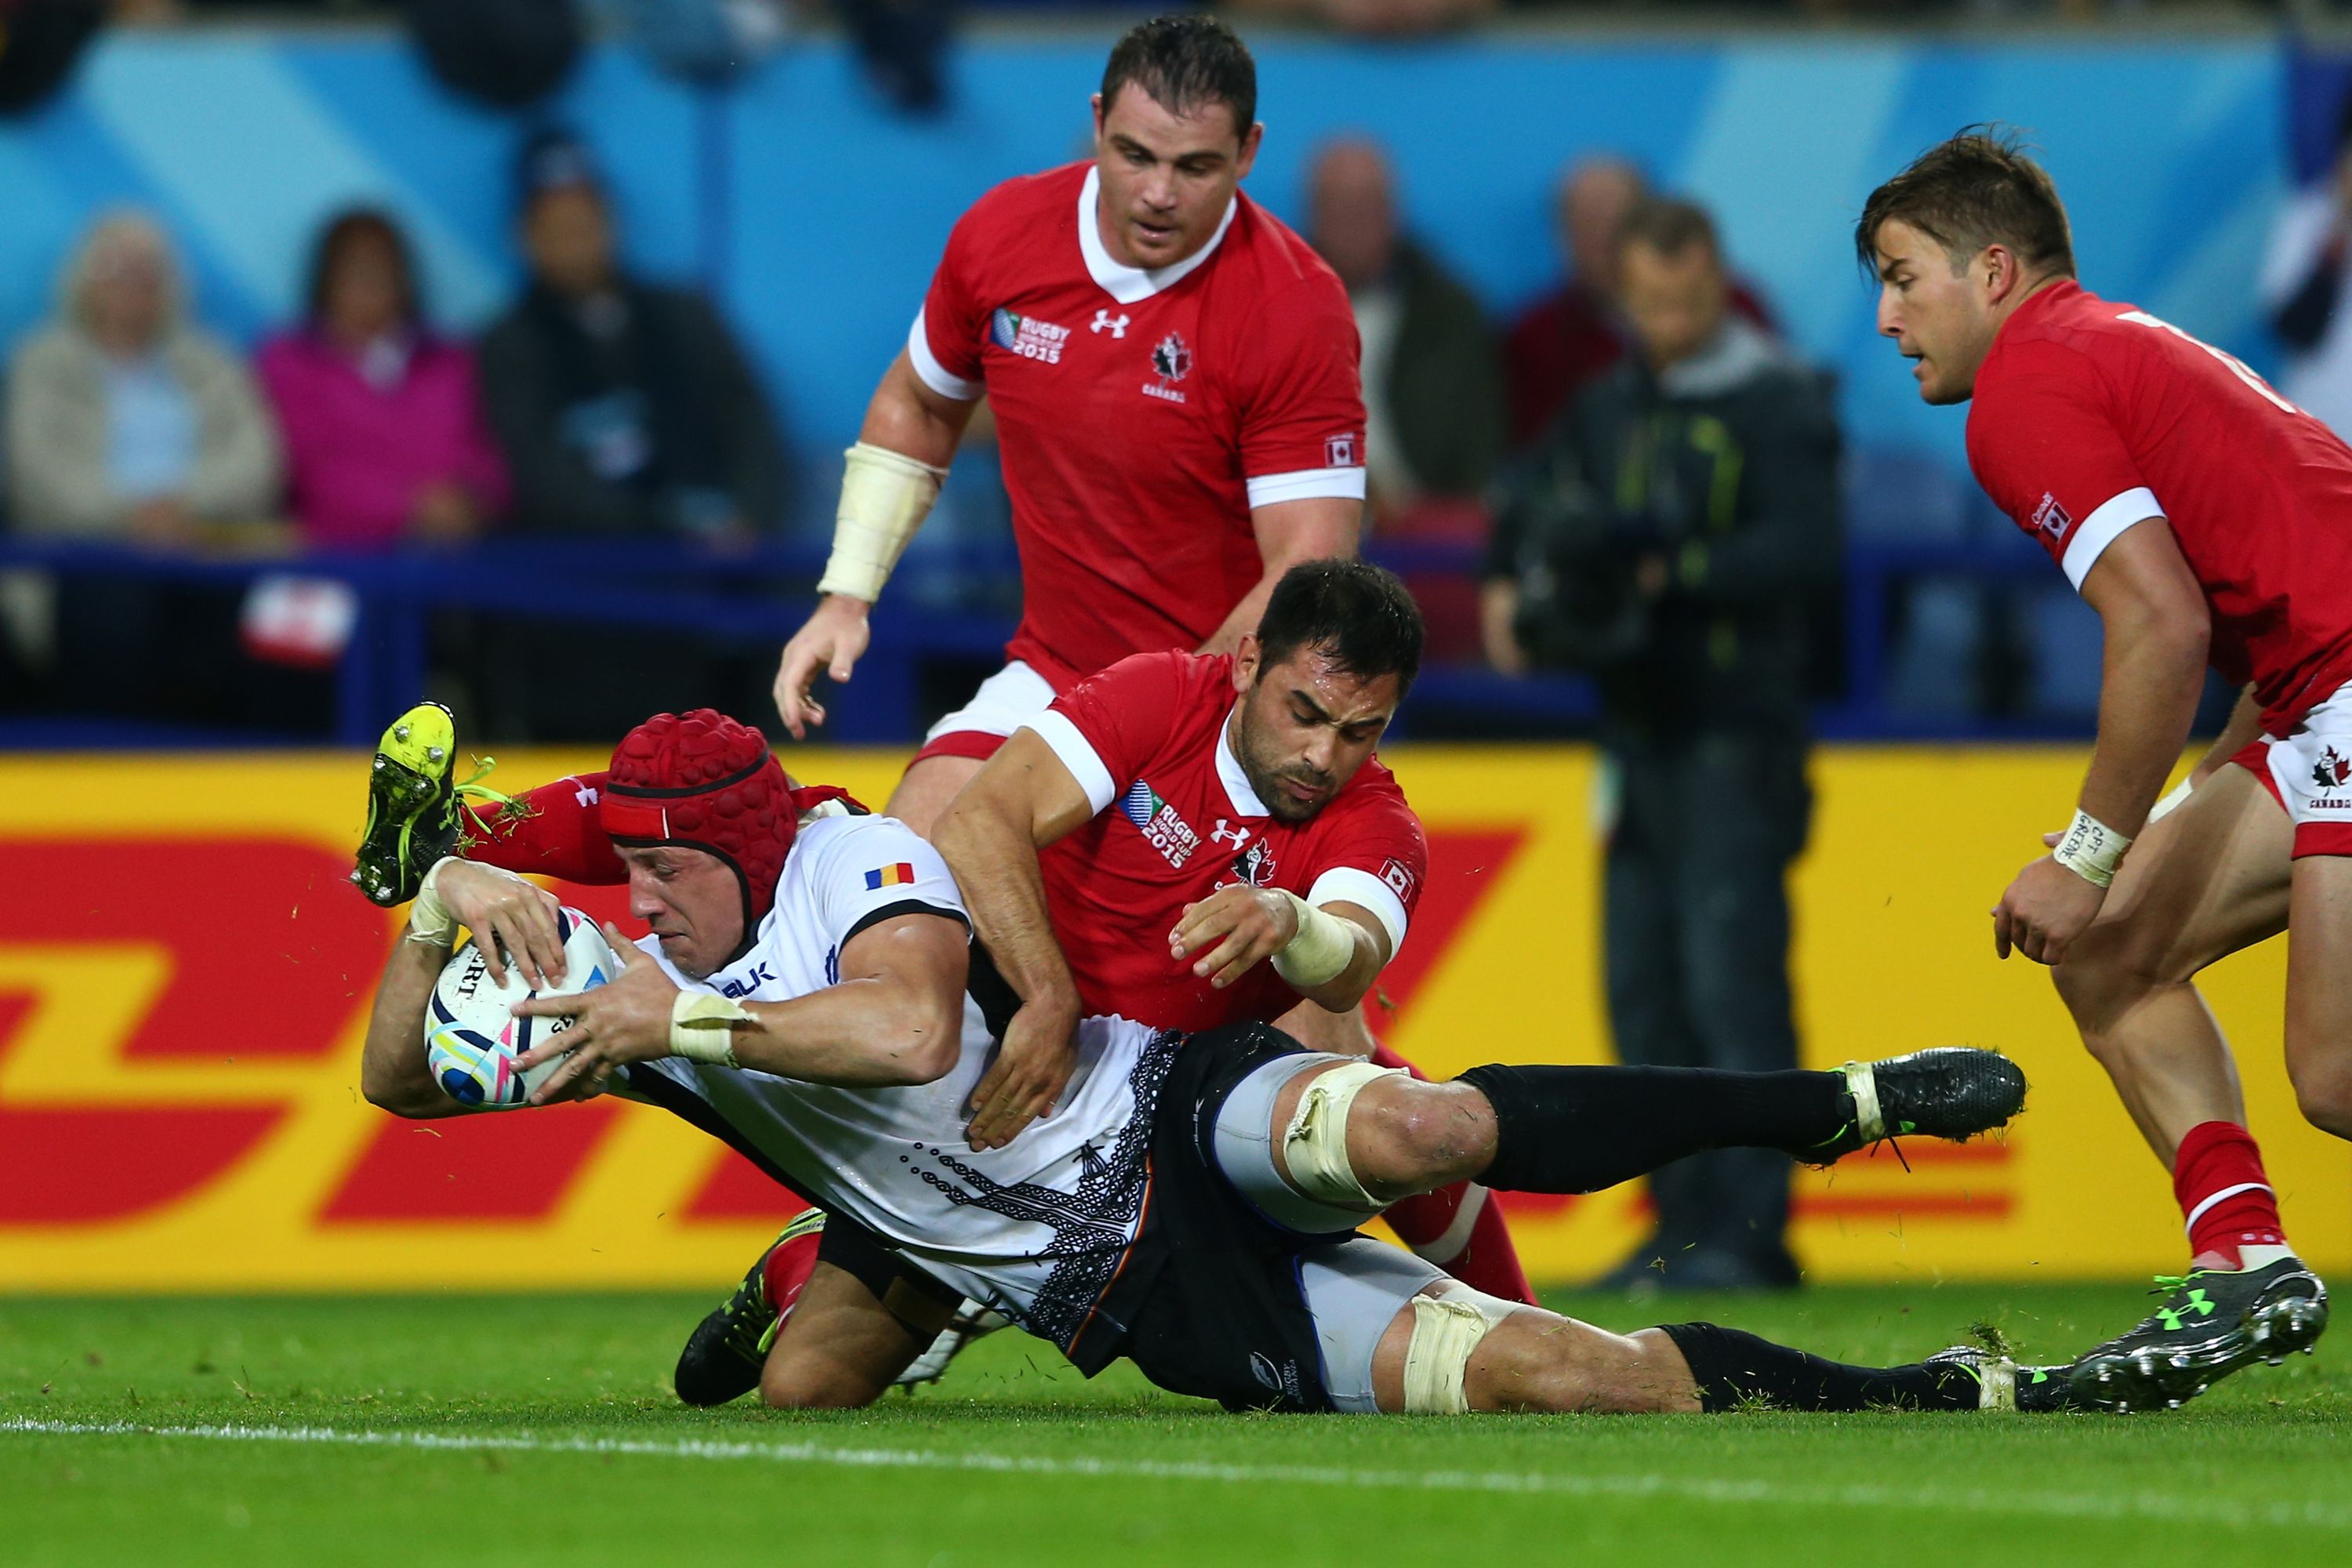 LEICESTER, ENGLAND - OCTOBER 06:  Mihai Macovei of Romania beats the Canada defence as he scores their second try during the 2015 Rugby World Cup Pool D match between Canada and Romania at Leicester City Stadium on October 6, 2015 in Leicester, United Kingdom.  (Photo by Michael Steele/Getty Images)